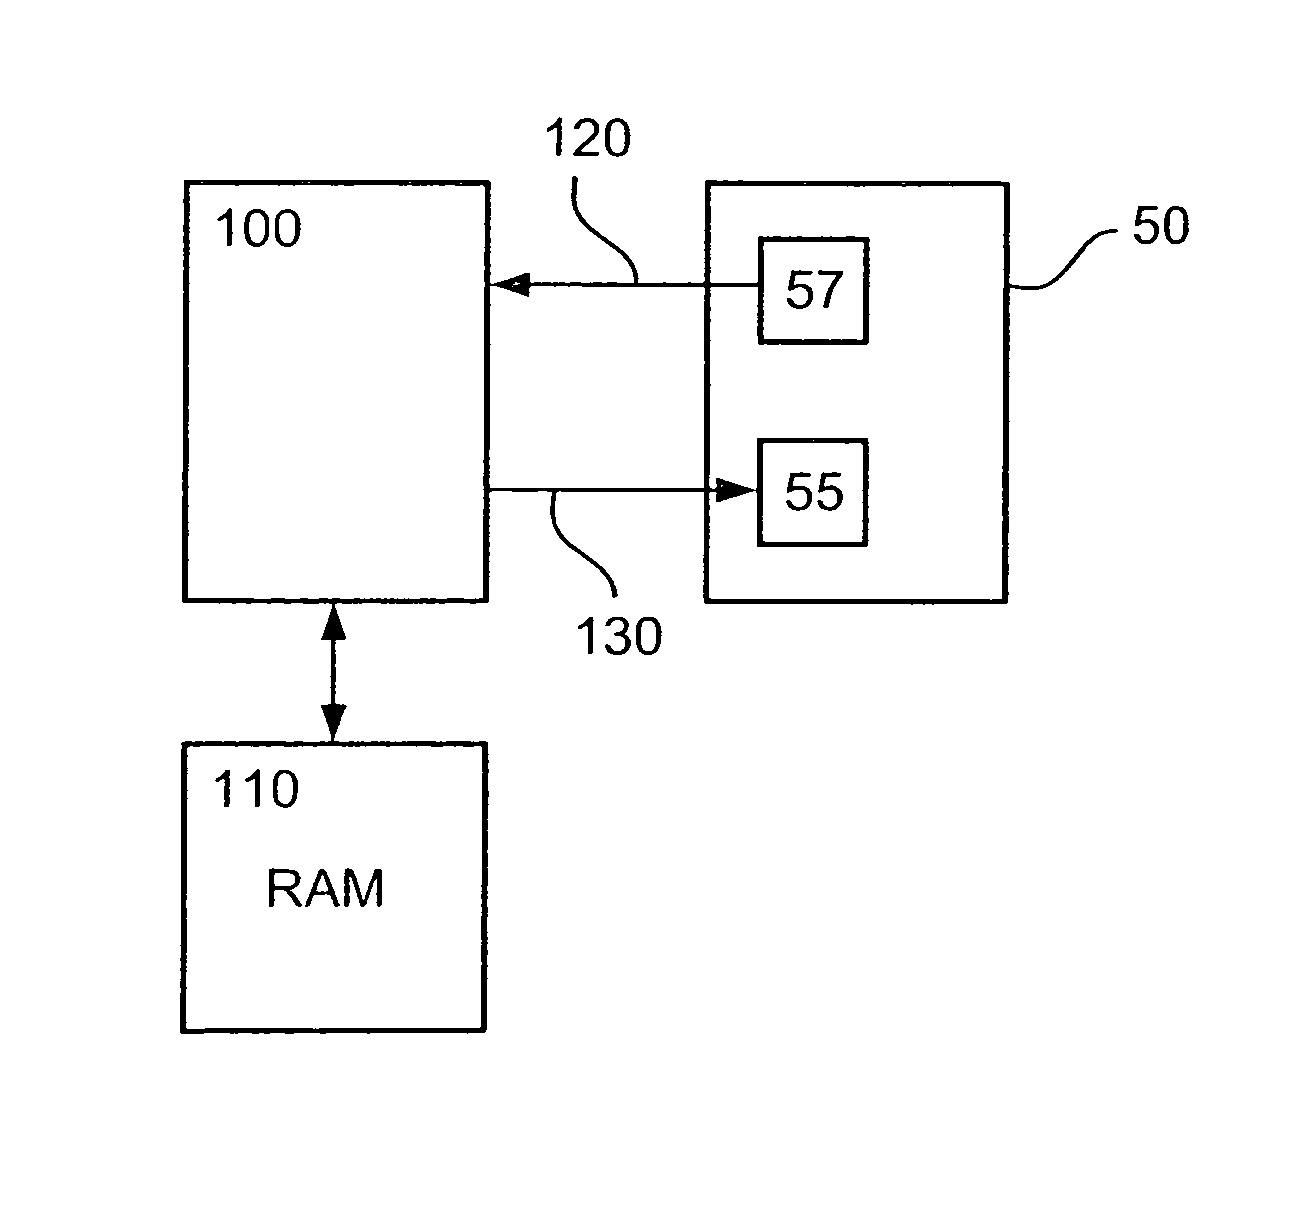 Acoustic wave resonator with integrated temperature control for oscillator purposes